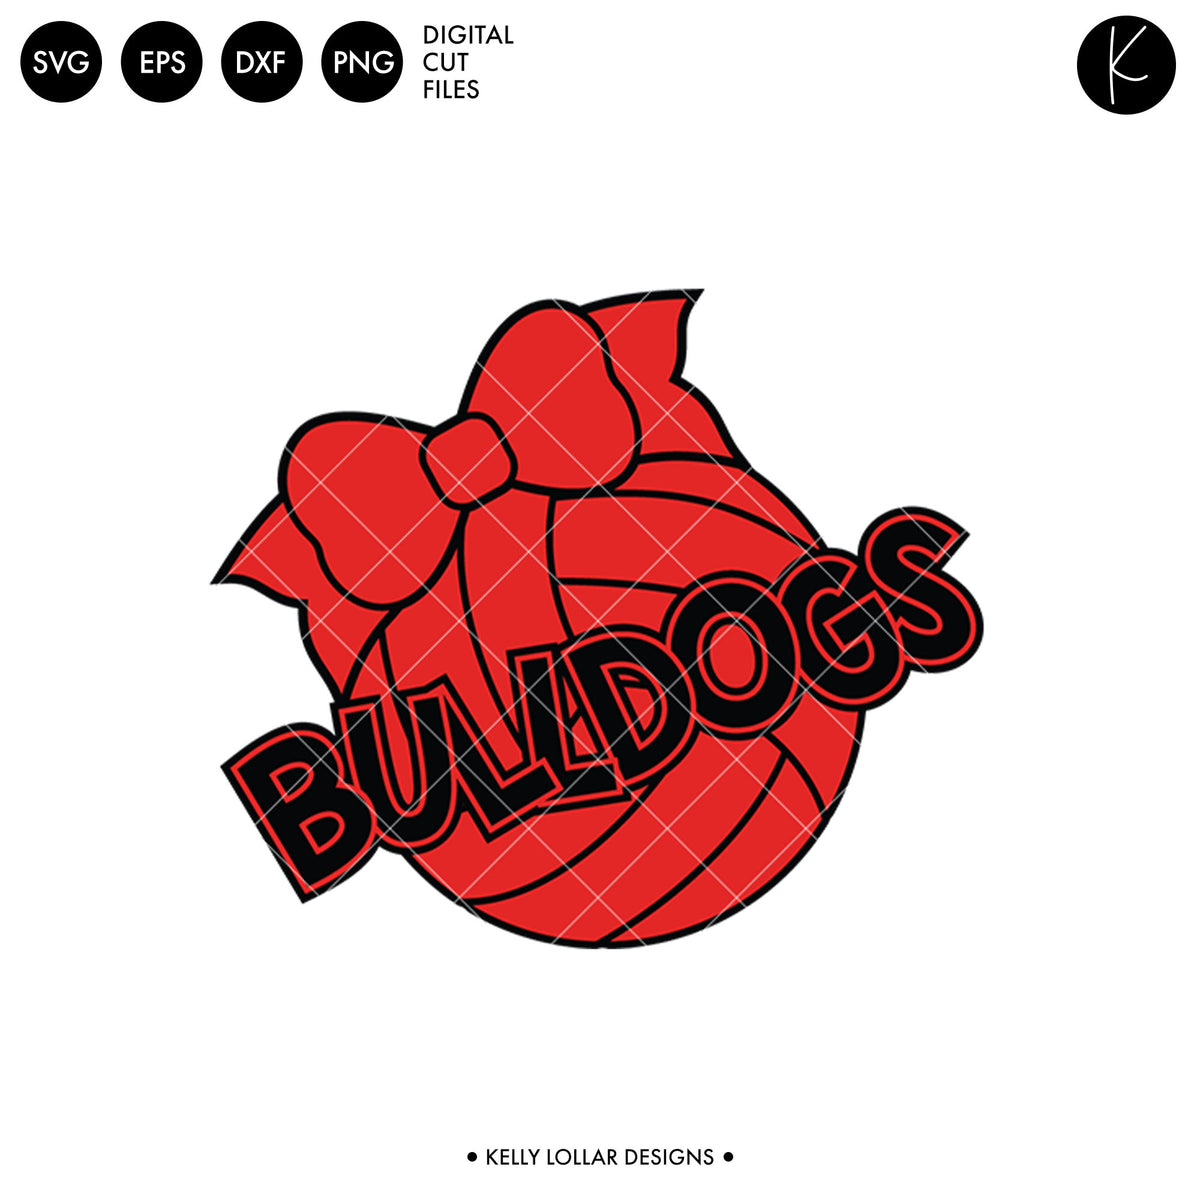 Bulldogs Volleyball Bundle | SVG DXF EPS PNG Cut Files